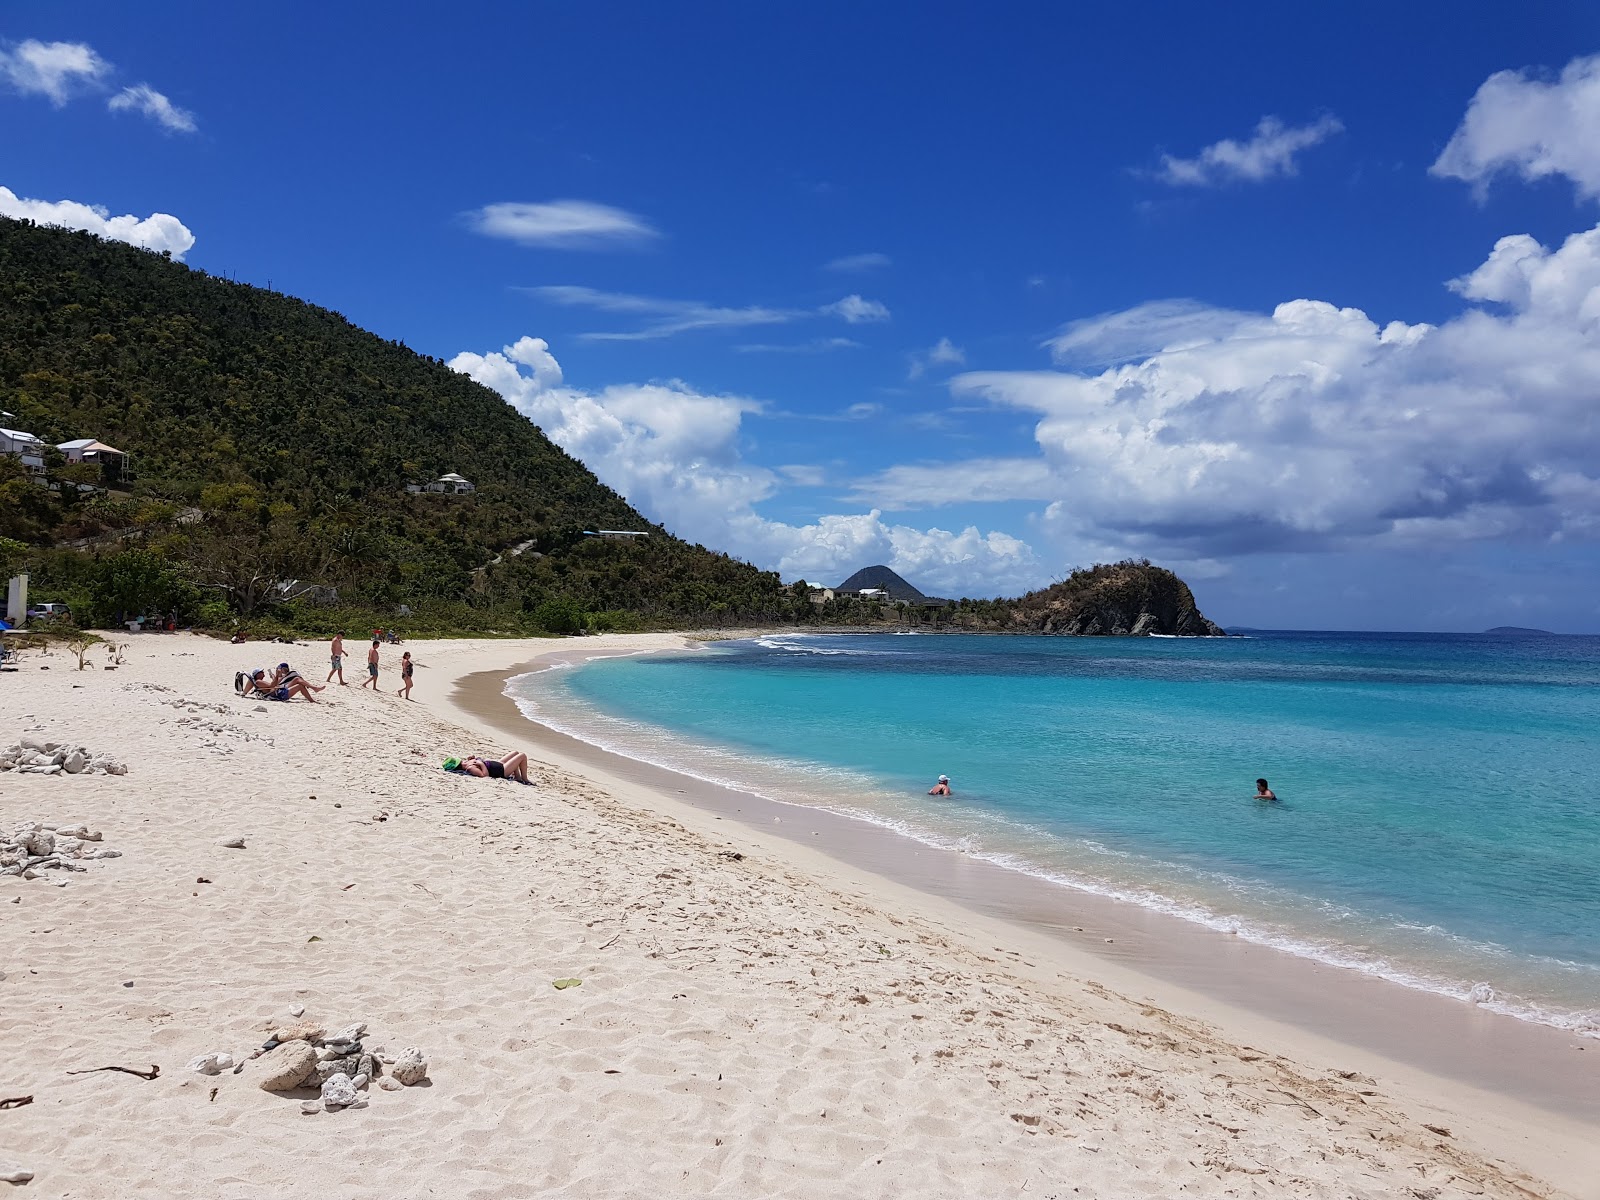 Photo of Smuggler's Cove beach with spacious bay